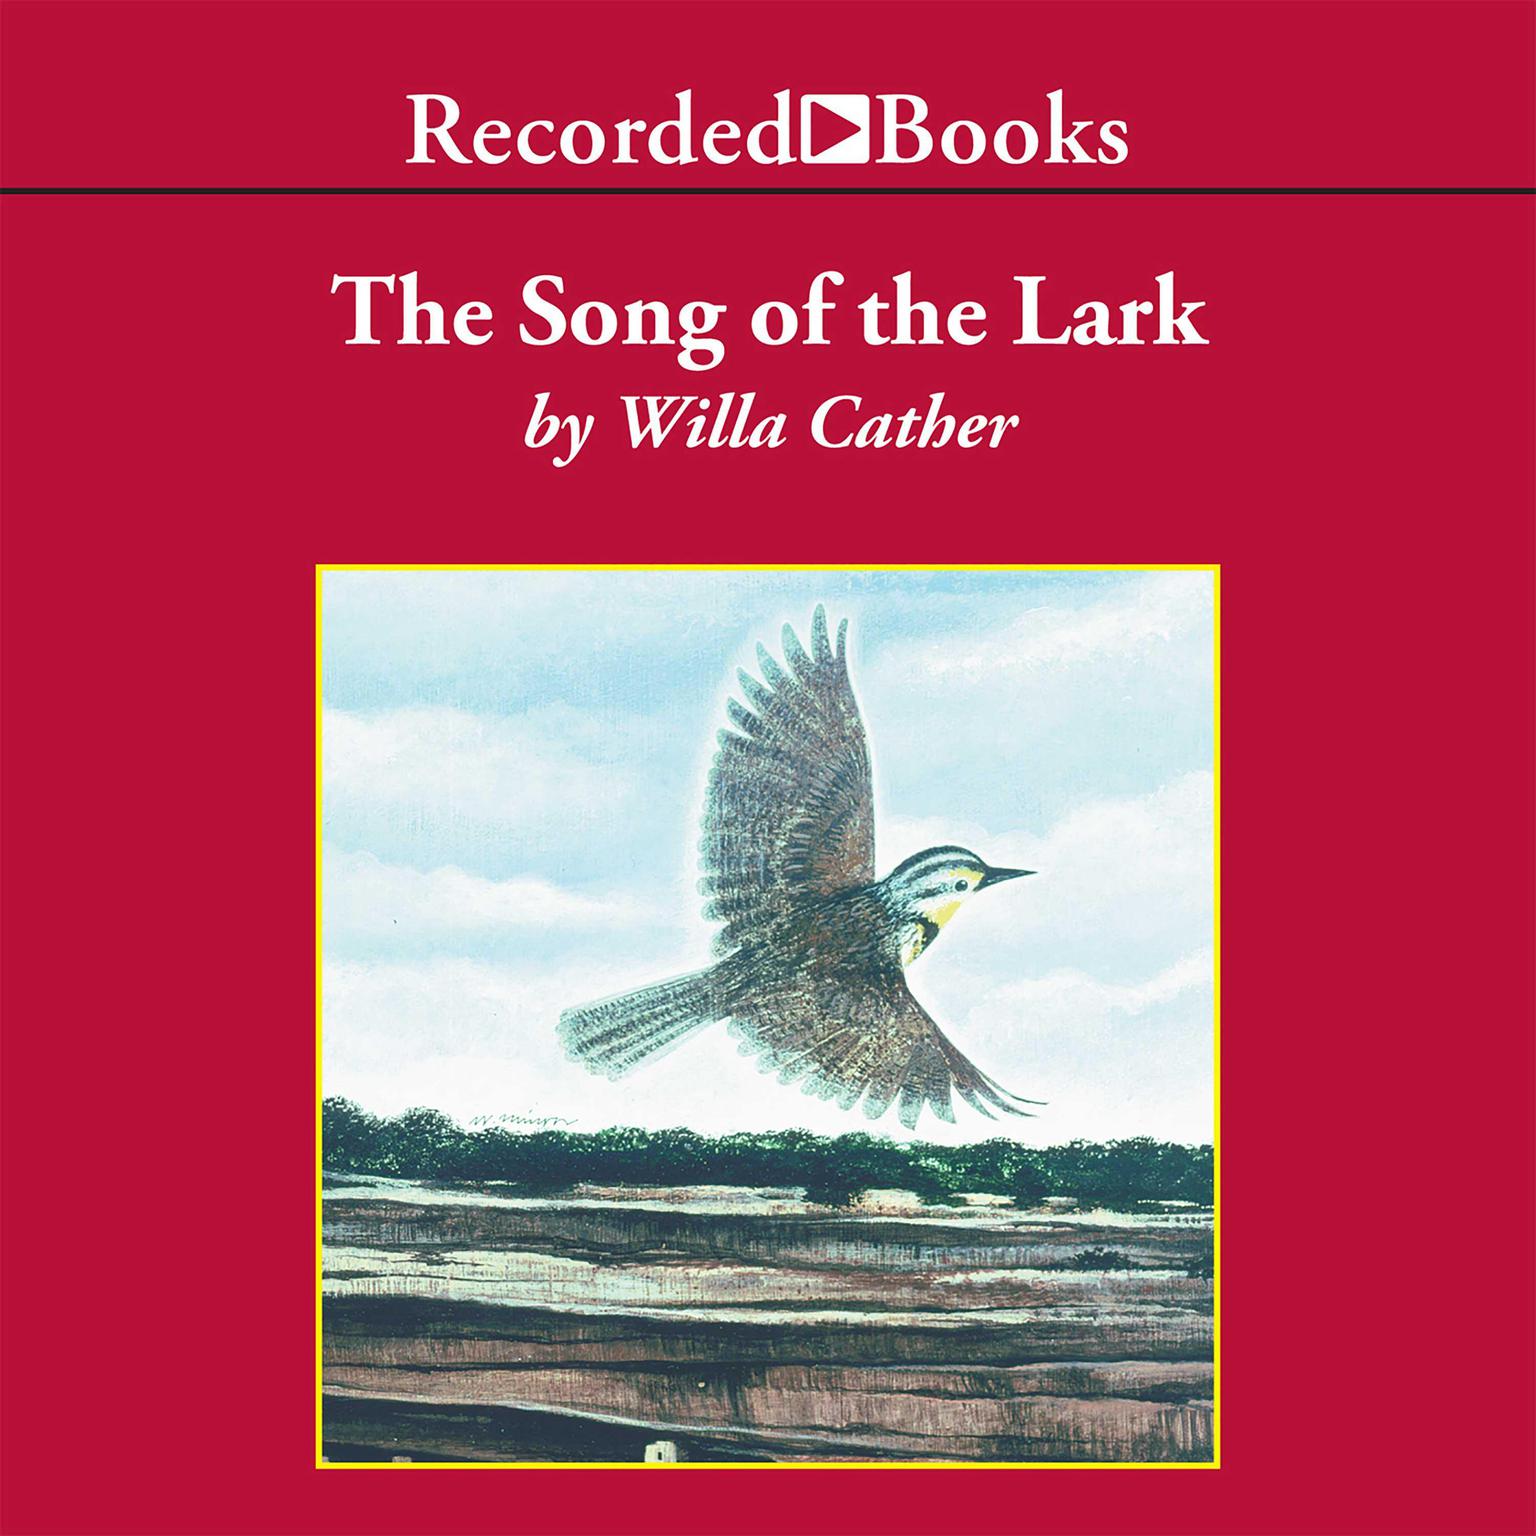 The Song of the Lark Audiobook, by Willa Cather